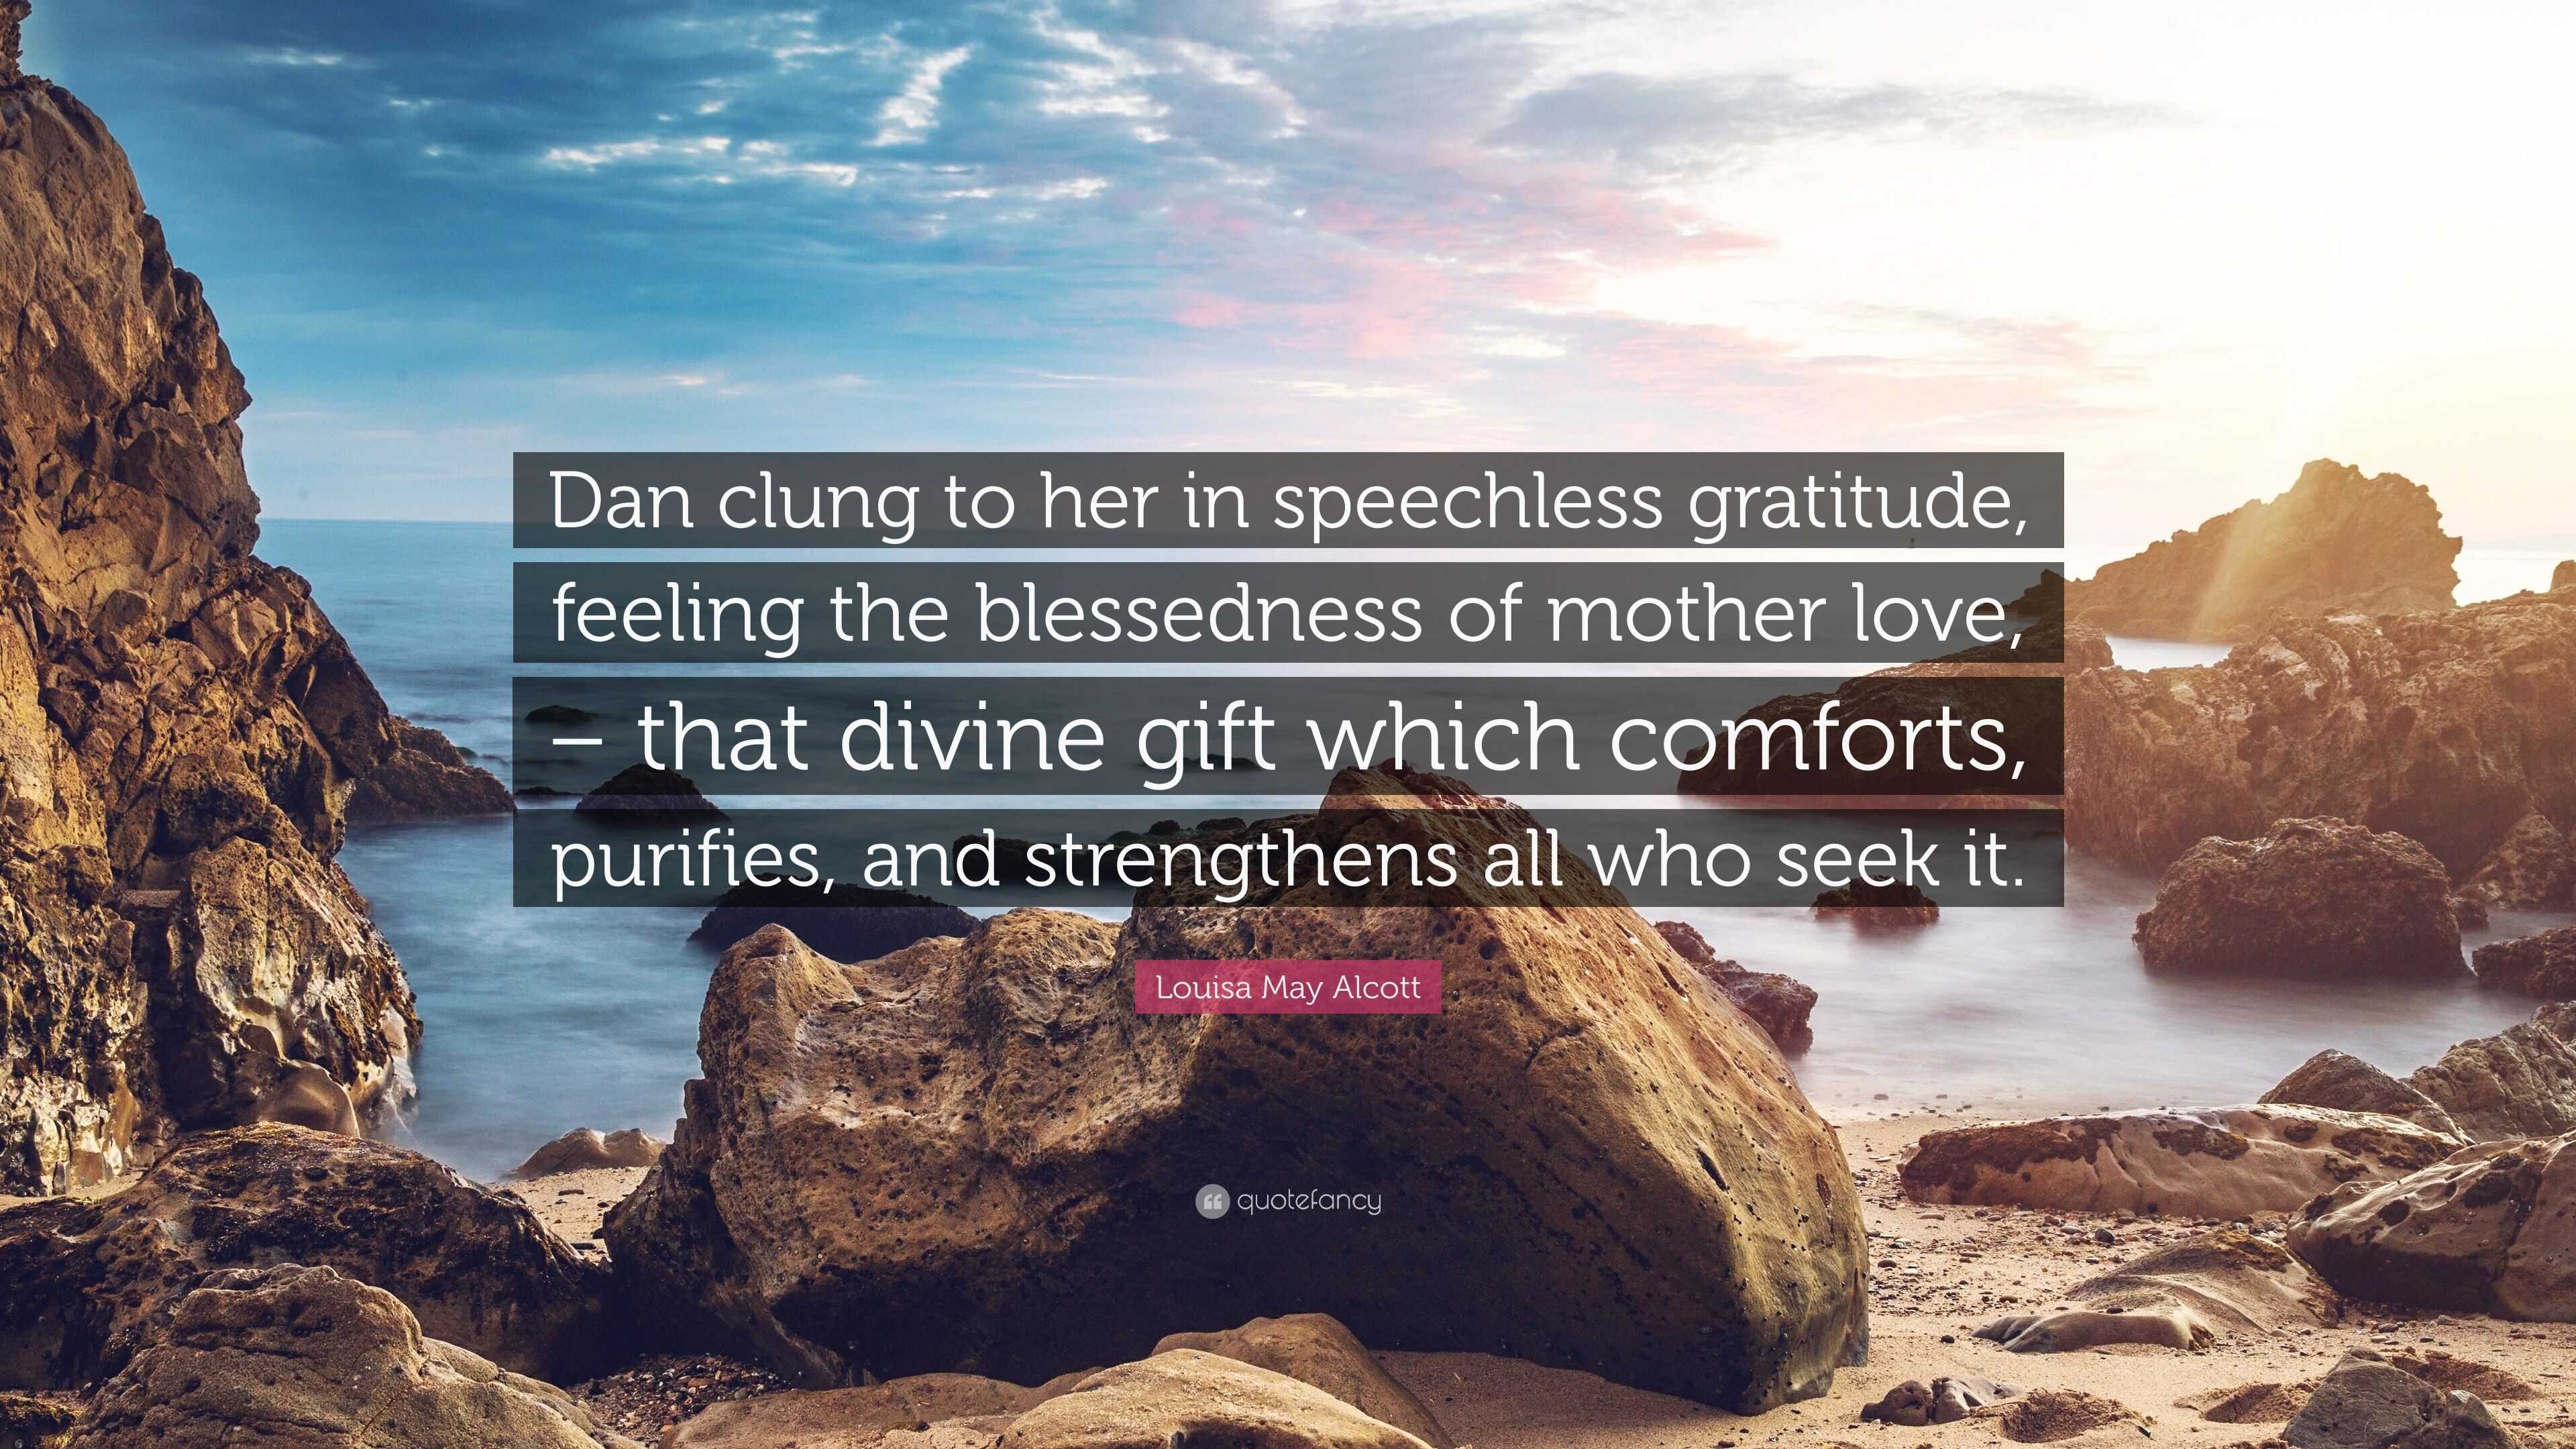 The Divine Gift of Gratitude: How to Appreciate the Blessings in Your